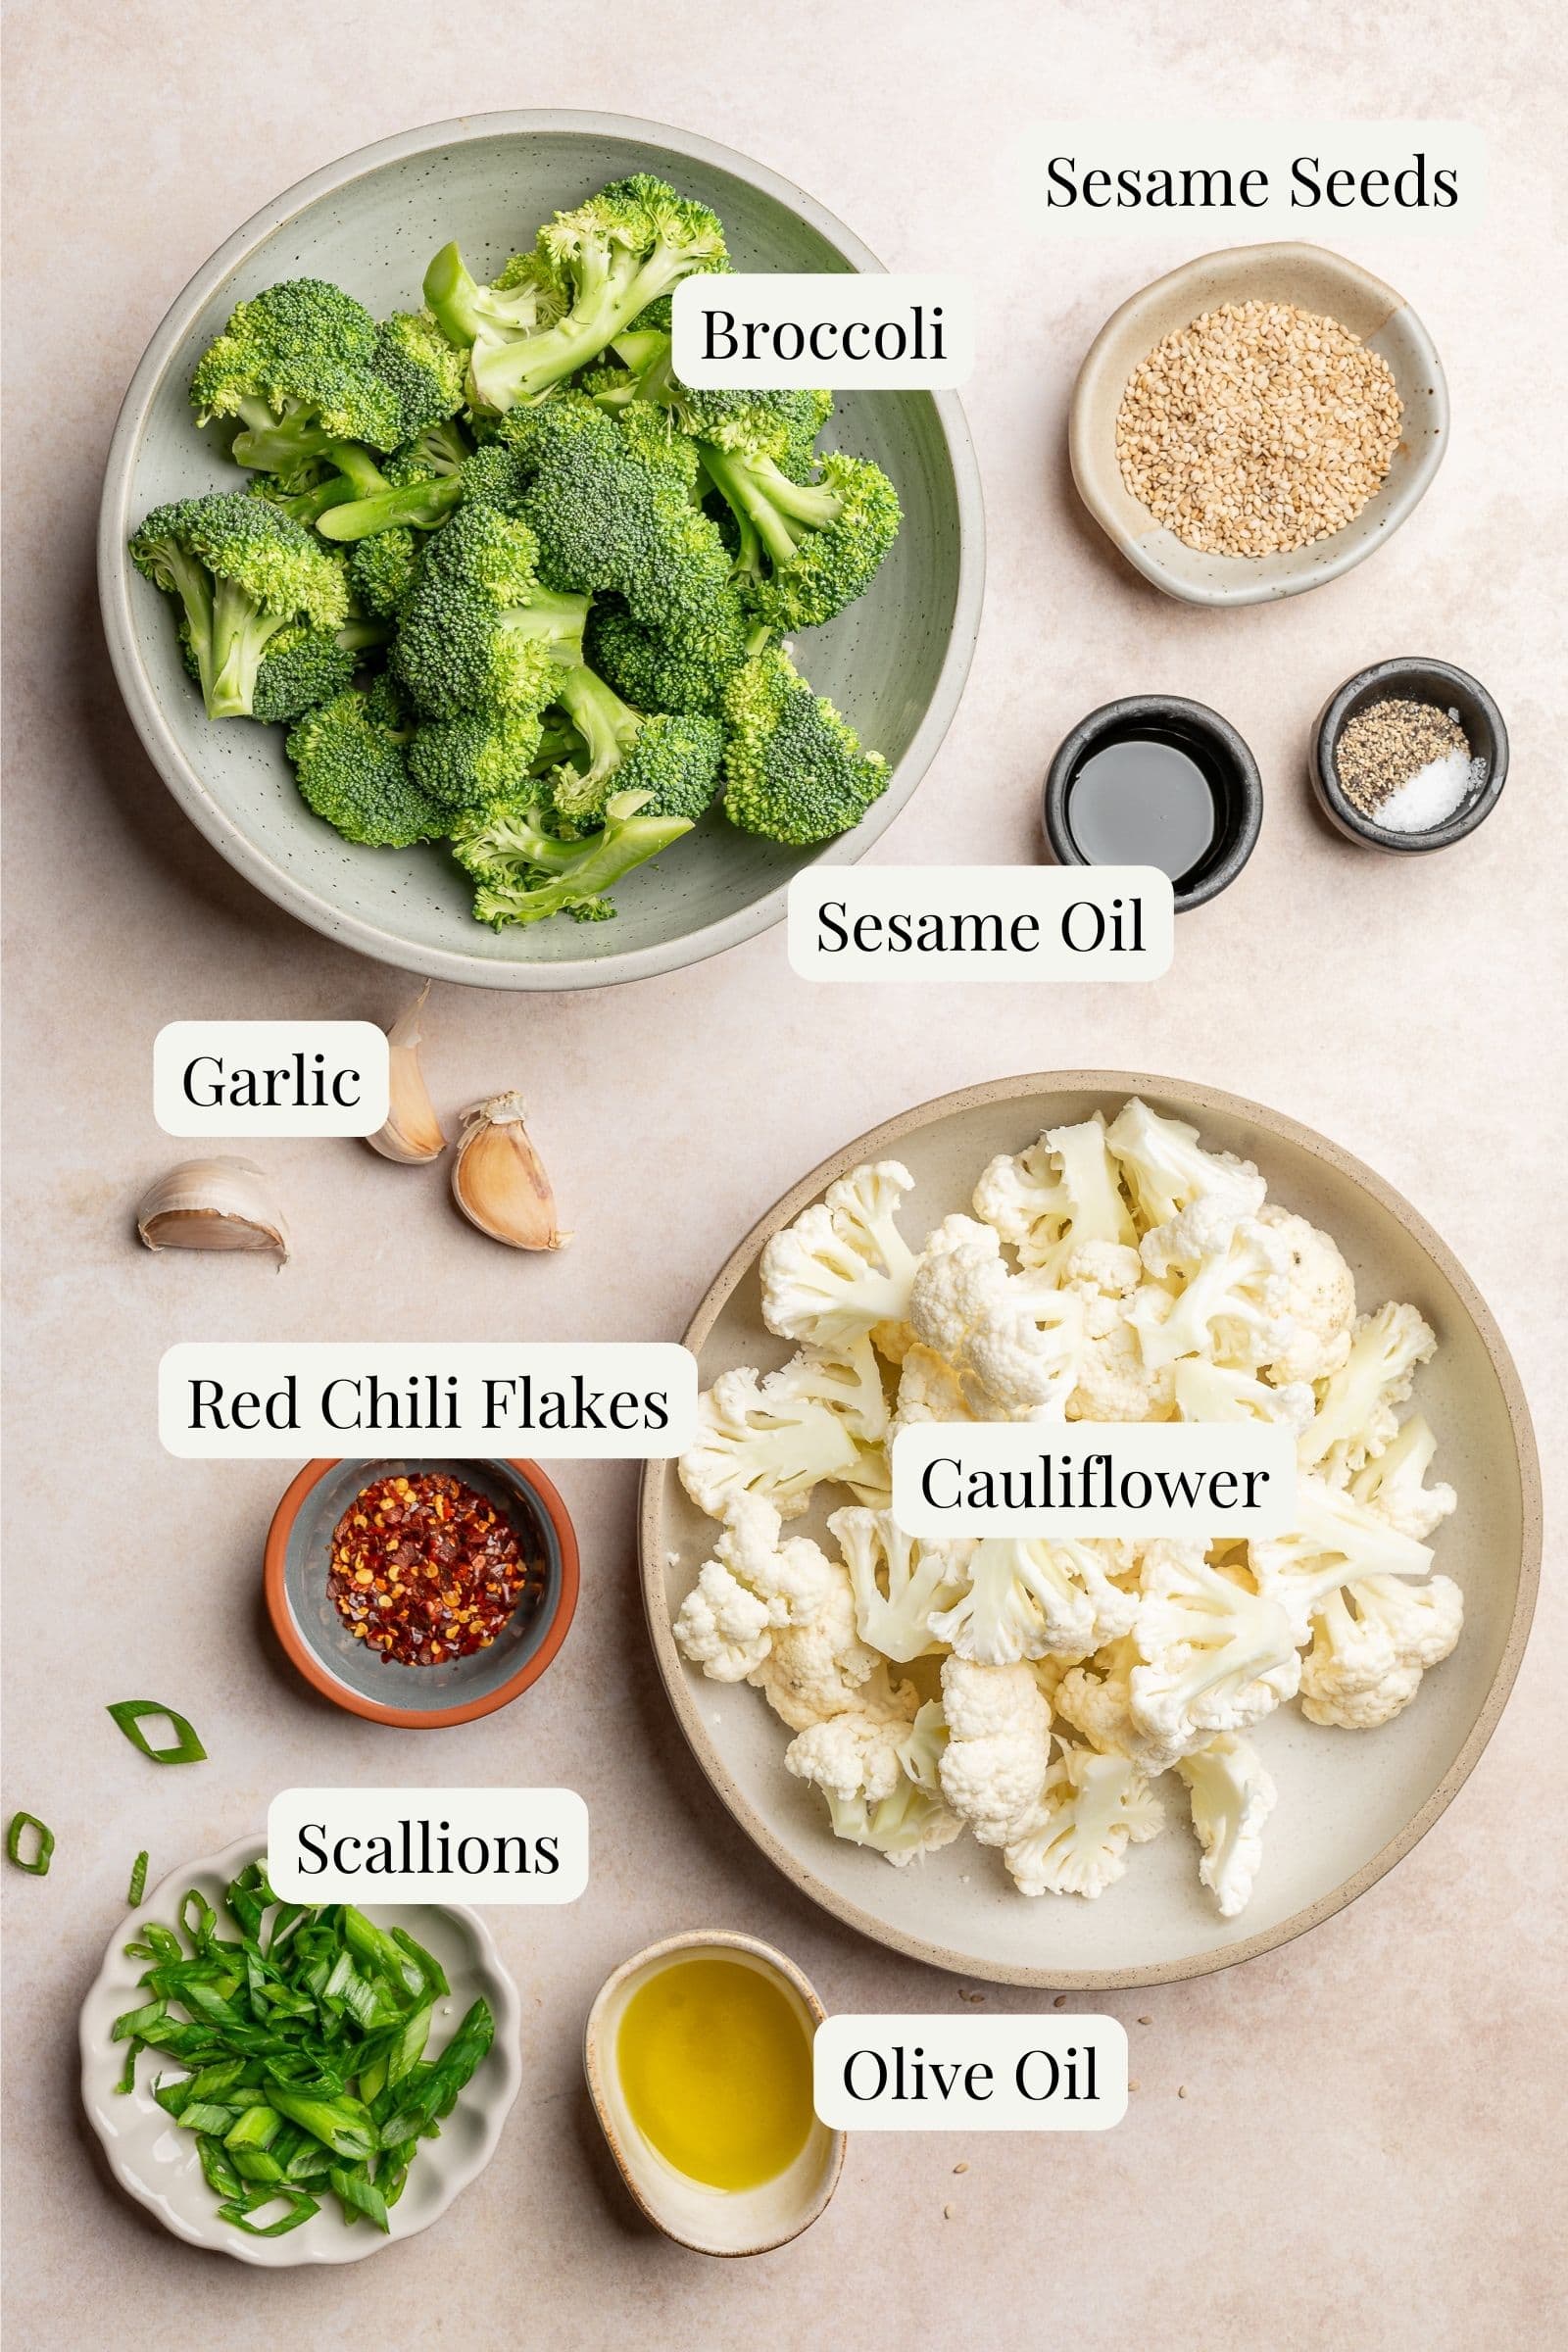 Labeled ingredients for air fried broccoli and cauliflower.